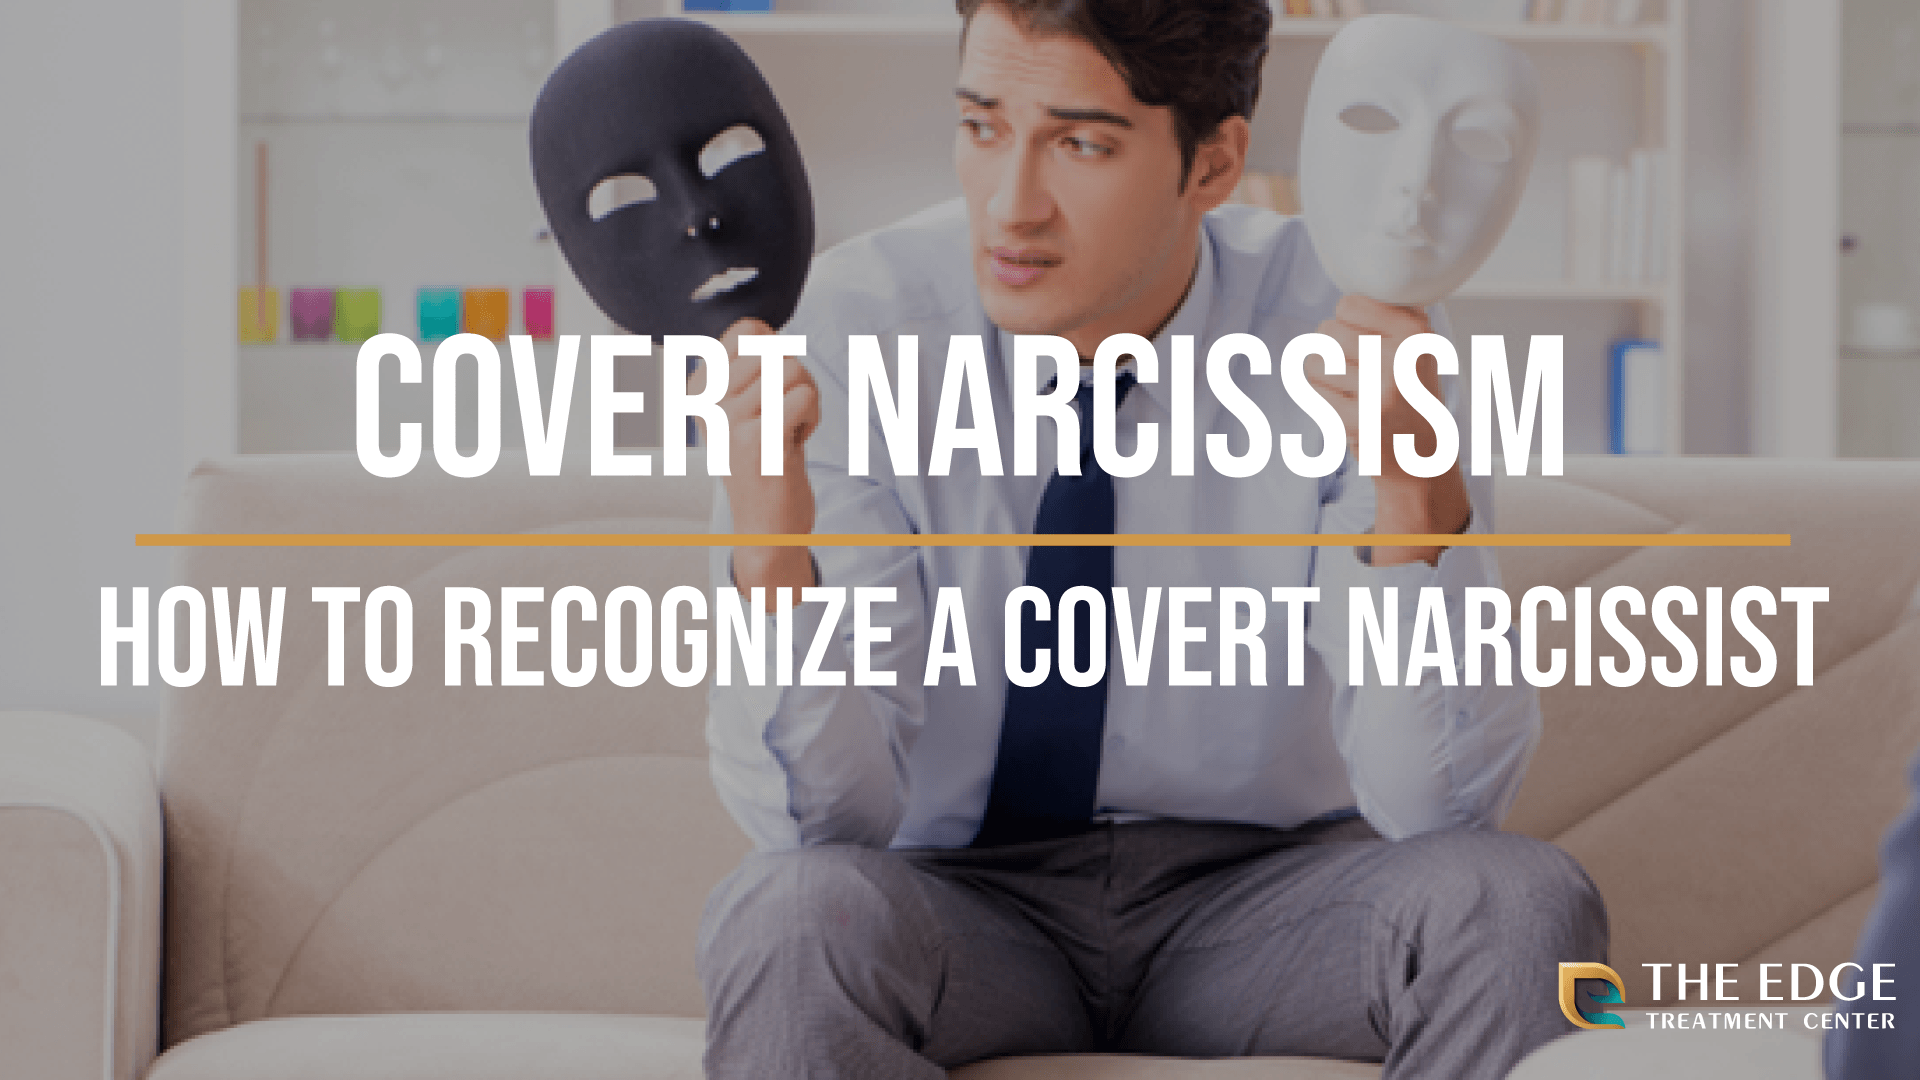 What is a Covert Narcissist?